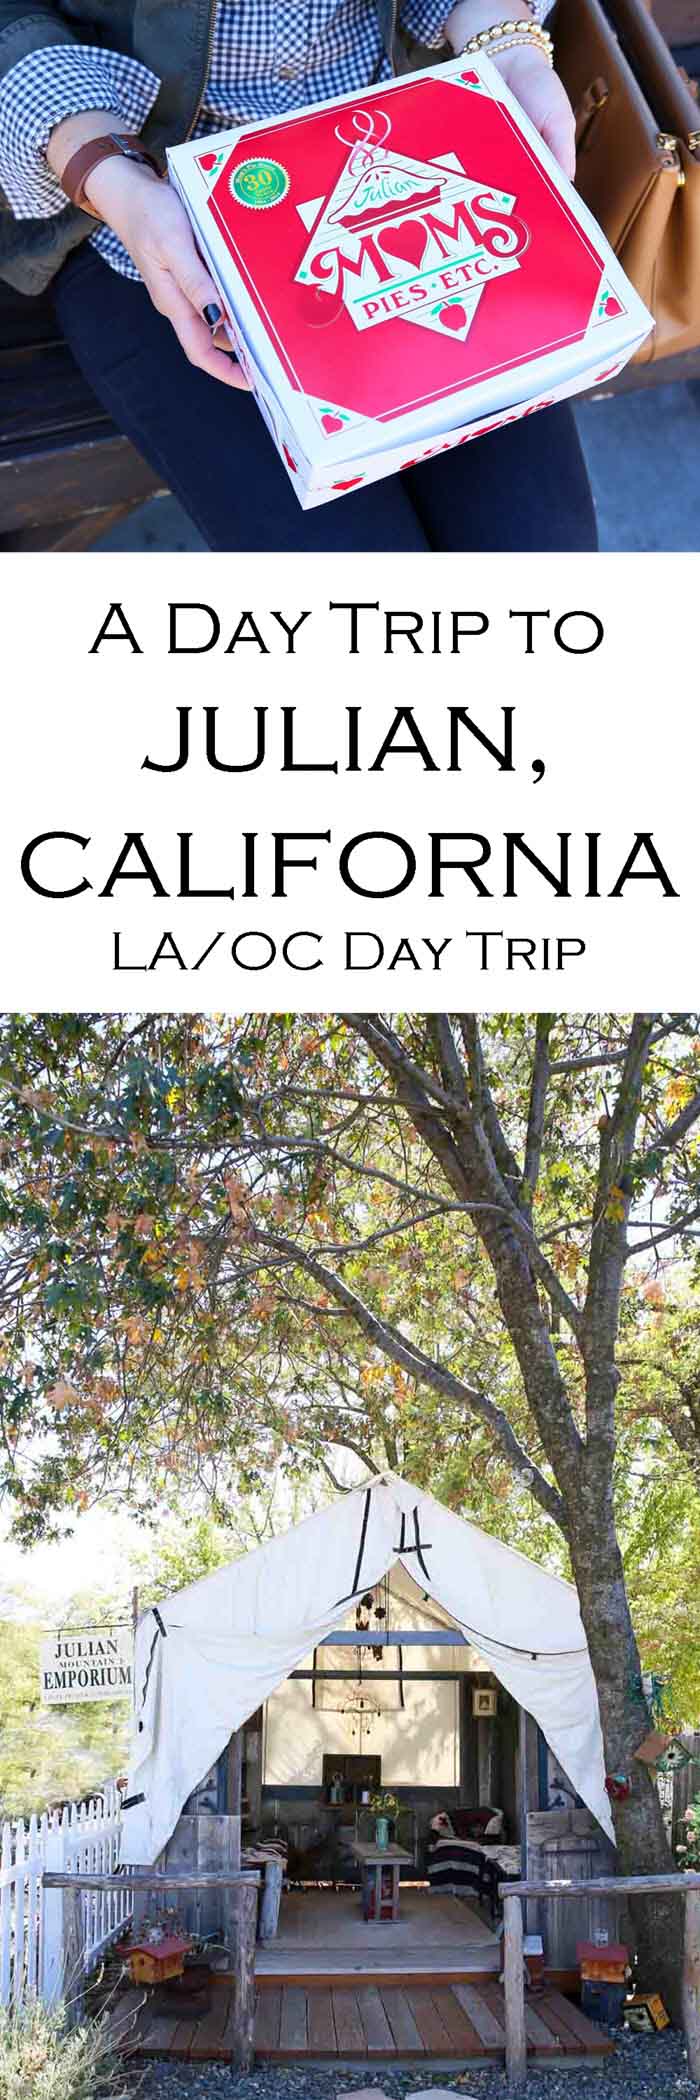 What to Do Julian, California Day Trip from Los Angeles #losangeles #orangecounty #daytrip #southerncalifornia #travelblogger